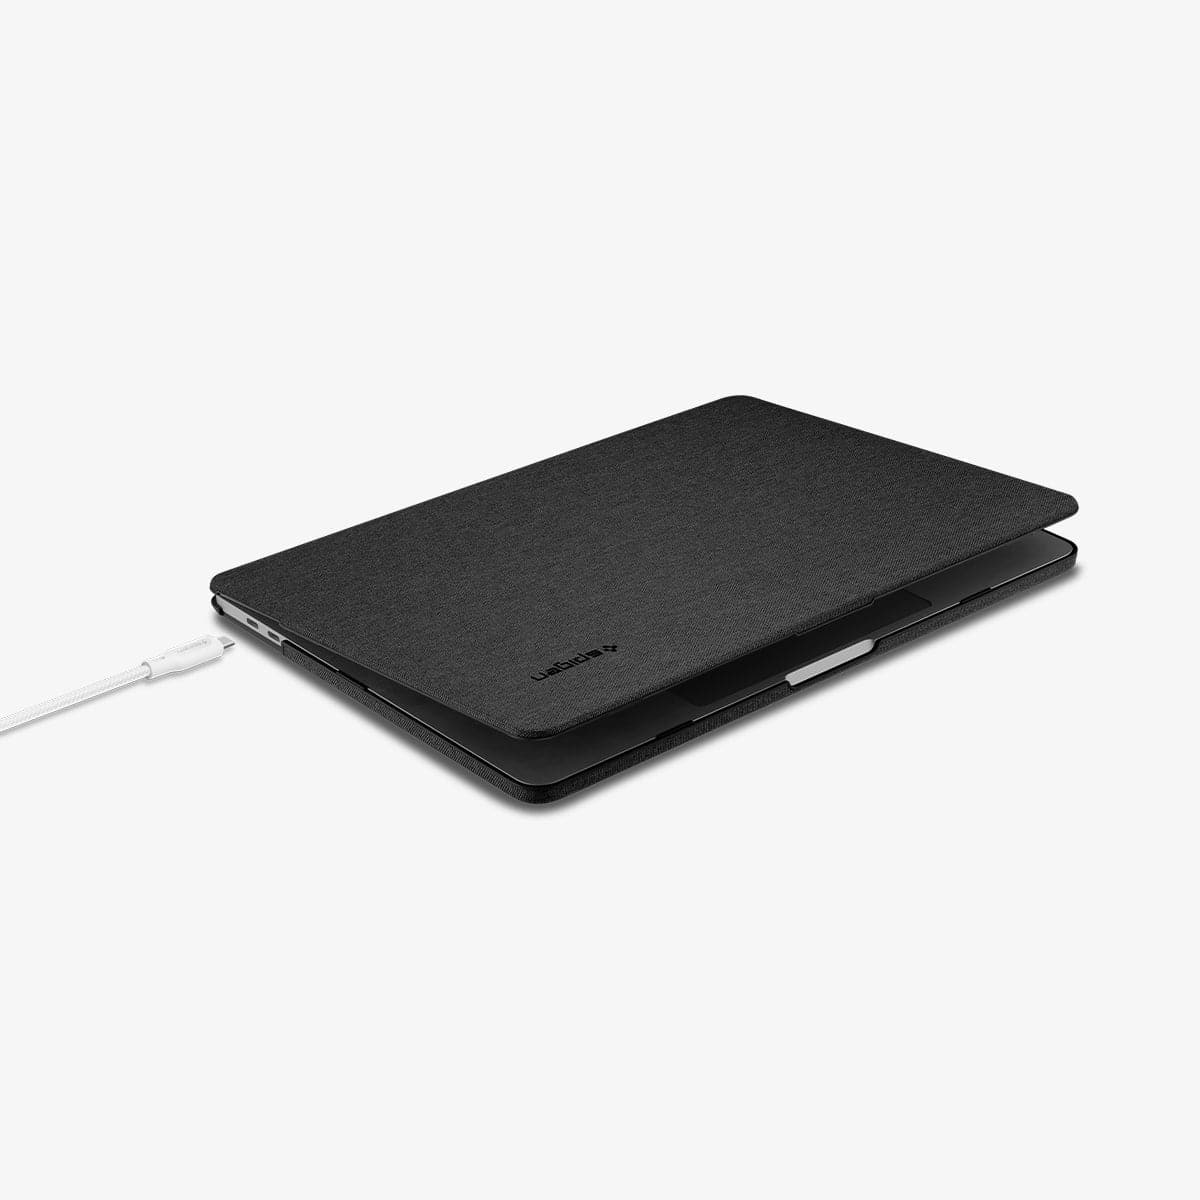 070CS25965 - MacBook Pro 13-inch Case Thin Fit in Black showing the top and side with laptop slightly open and charging cable next to slot